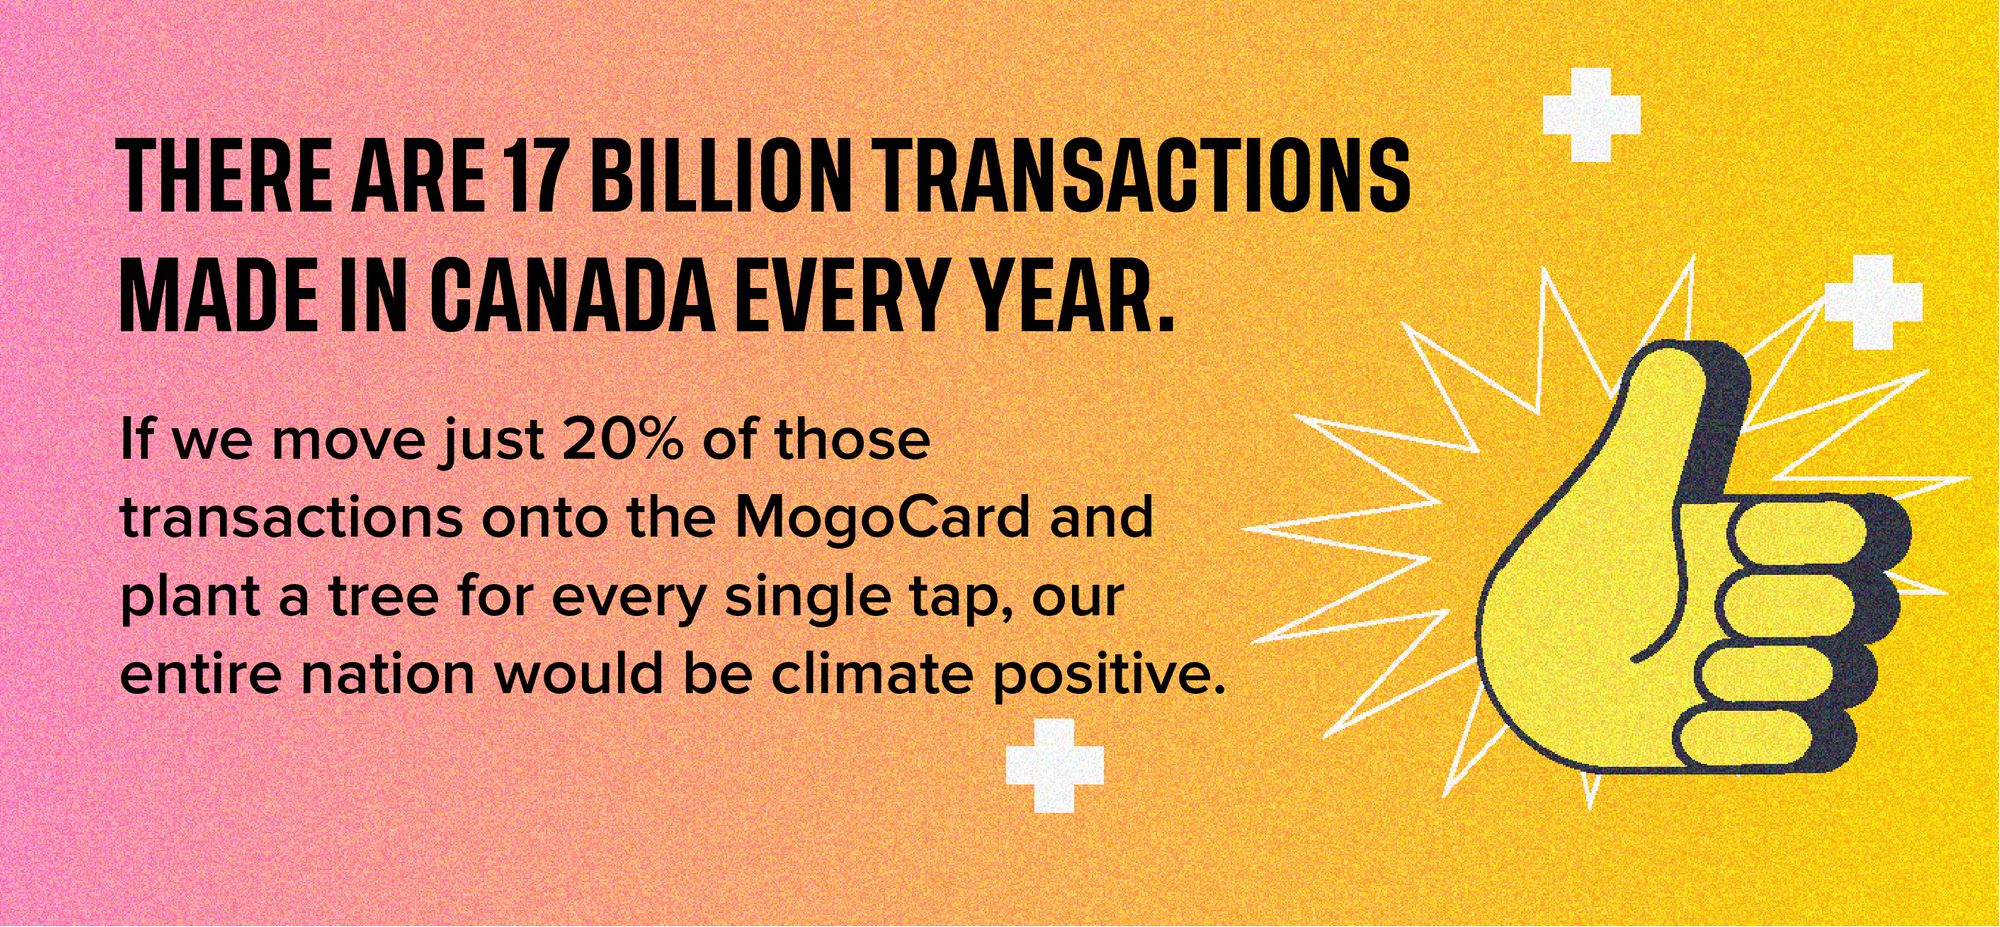 There are approximately 17 billion transactions carried out in Canada every single year. If we move just 20% of those transactions onto the MogoCard and plant a tree for every single tap, our entire nation would be climate positive.